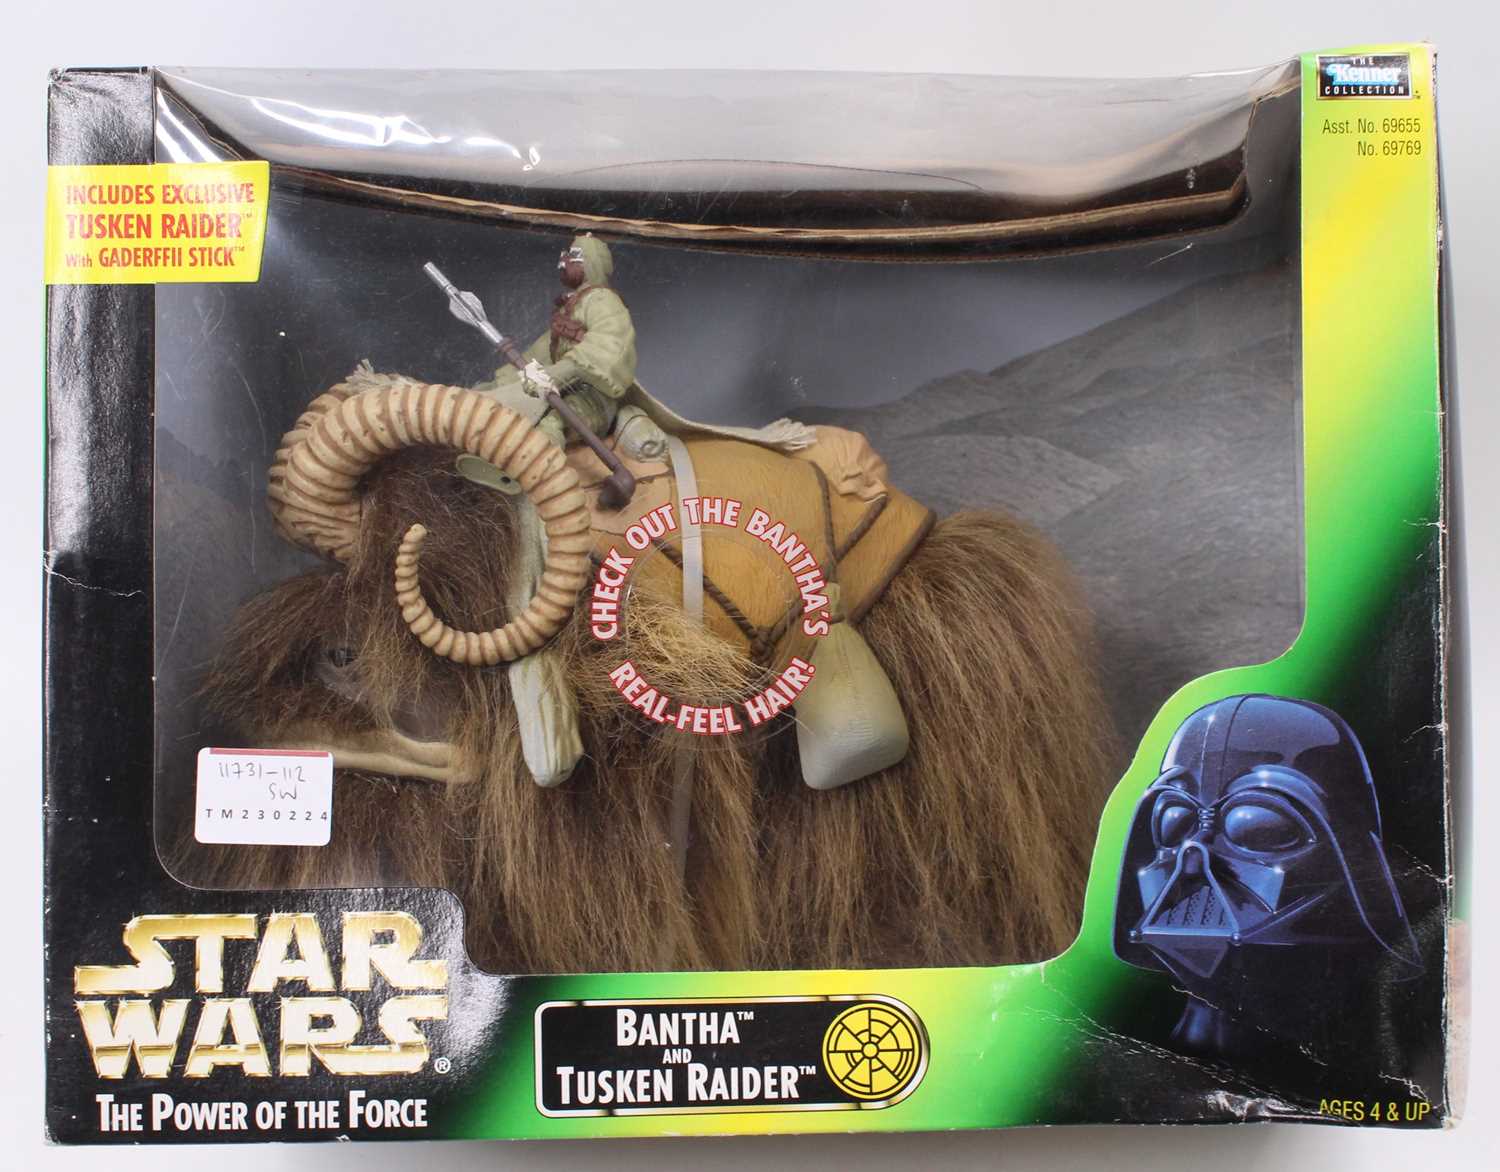 A Star Wars The Power of the Force 1998 boxed Bantha & Tusken Raider action figure set, housed in